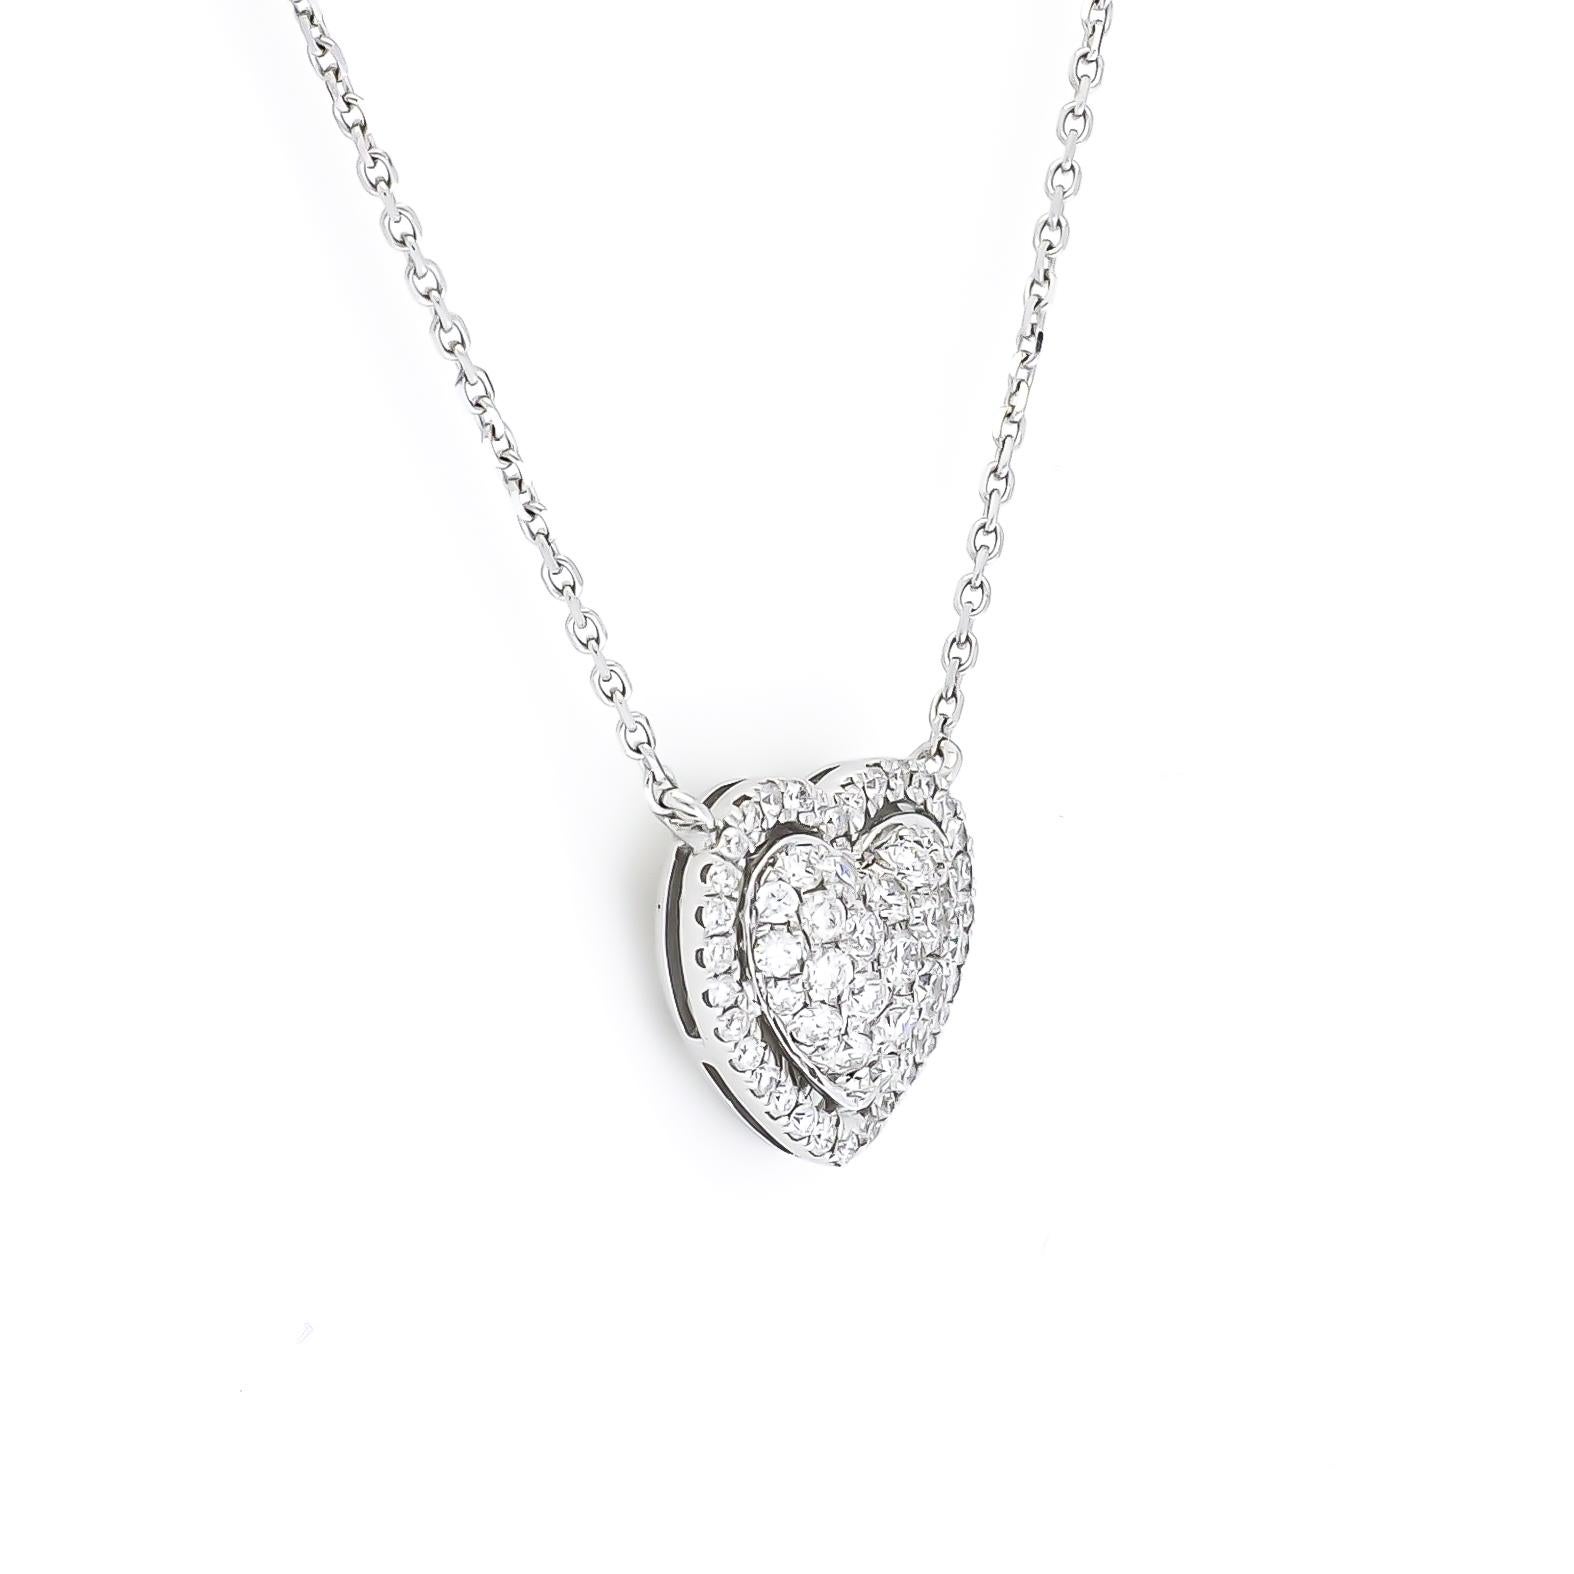 Modern Natural Diamond Pendant 0.55 cts 18KT White Gold Heart Pendant Necklace For Sale